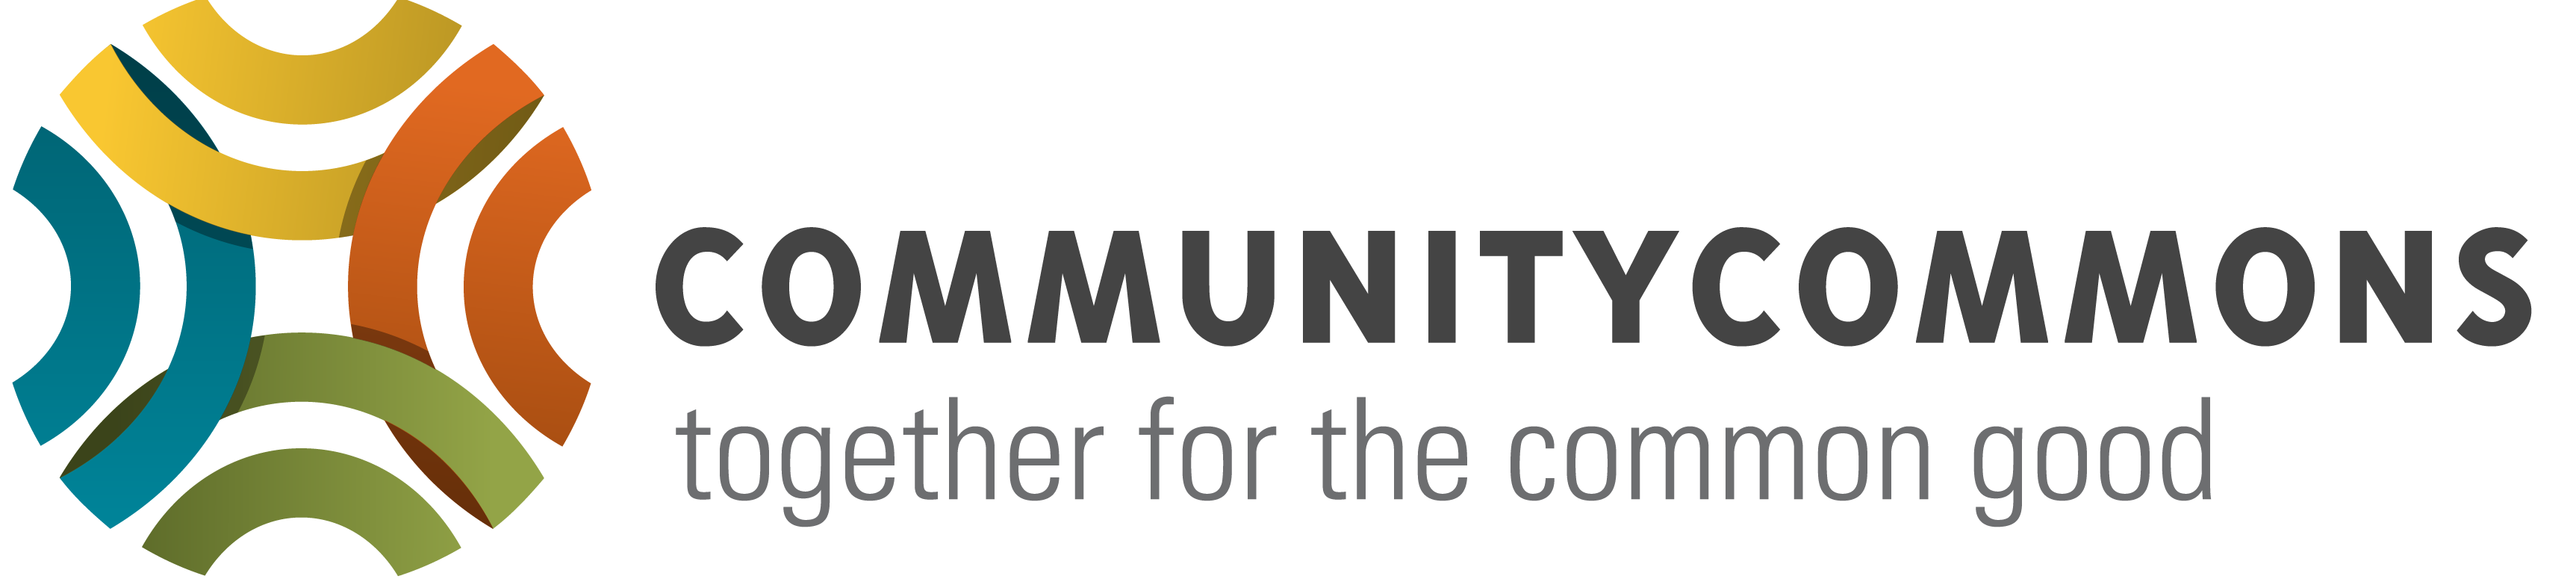 Community Commons Logo & Tagline: Together for the Common Good